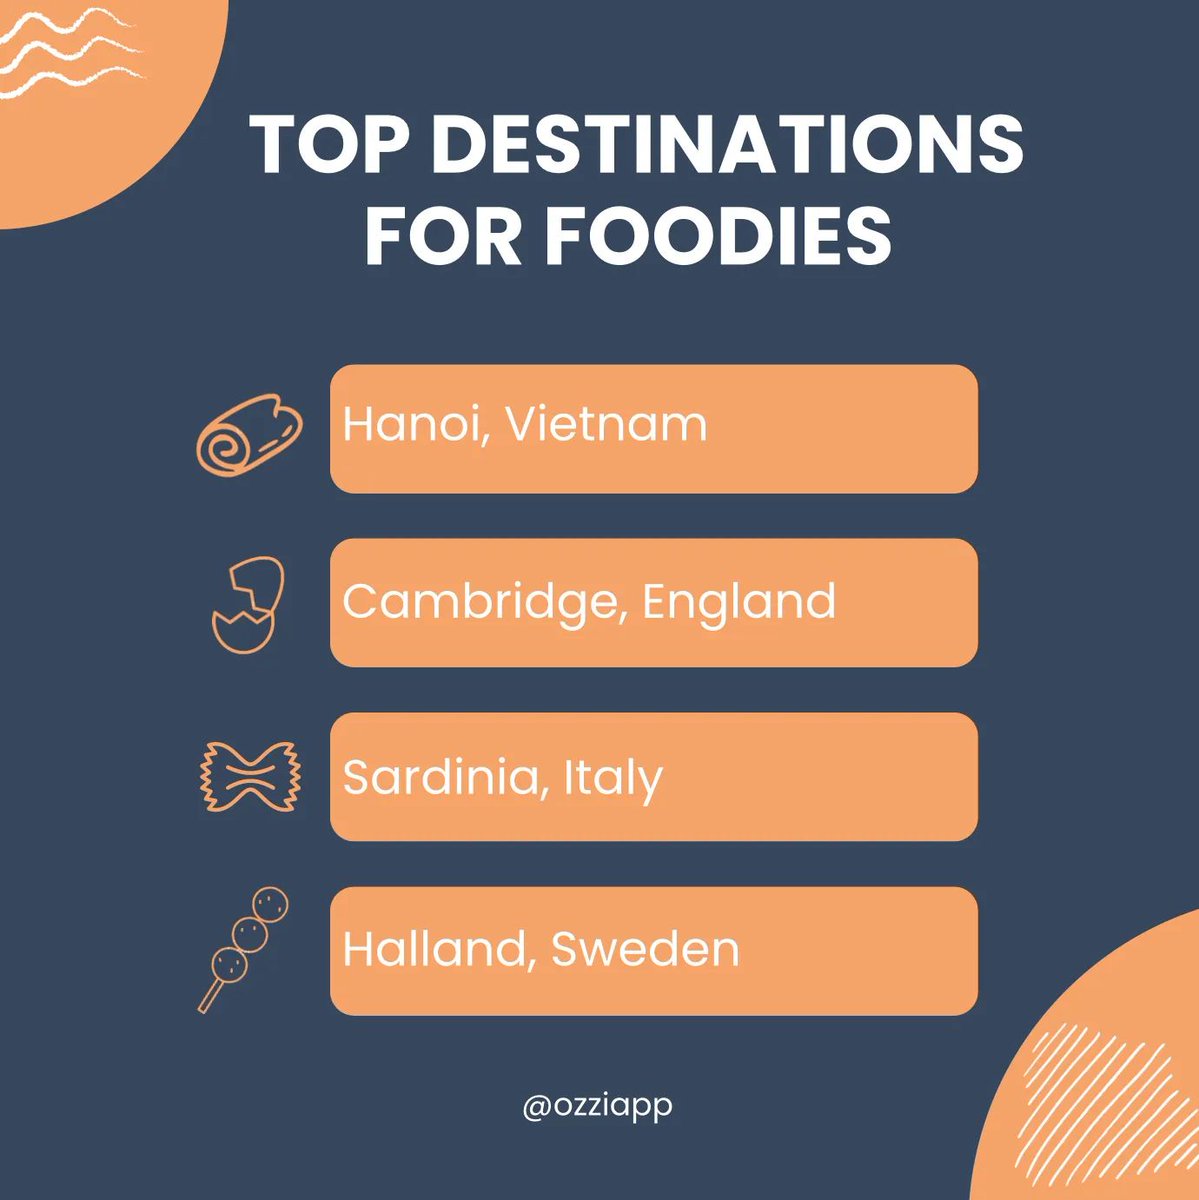 Embark on a safer culinary adventure with OZZI!

#Travel #Safety #SafetyFirst #OZZI #OZZIEffect #TravelEats
#Food #Adventure #Foodie #Yummy #Eating #Flavor #SafeTravels #FoodieFaves
 #GlobalCuisine #Hanoi #Vietnam #Cambridge #England #Sardinia #Italy #Halland #Sweden